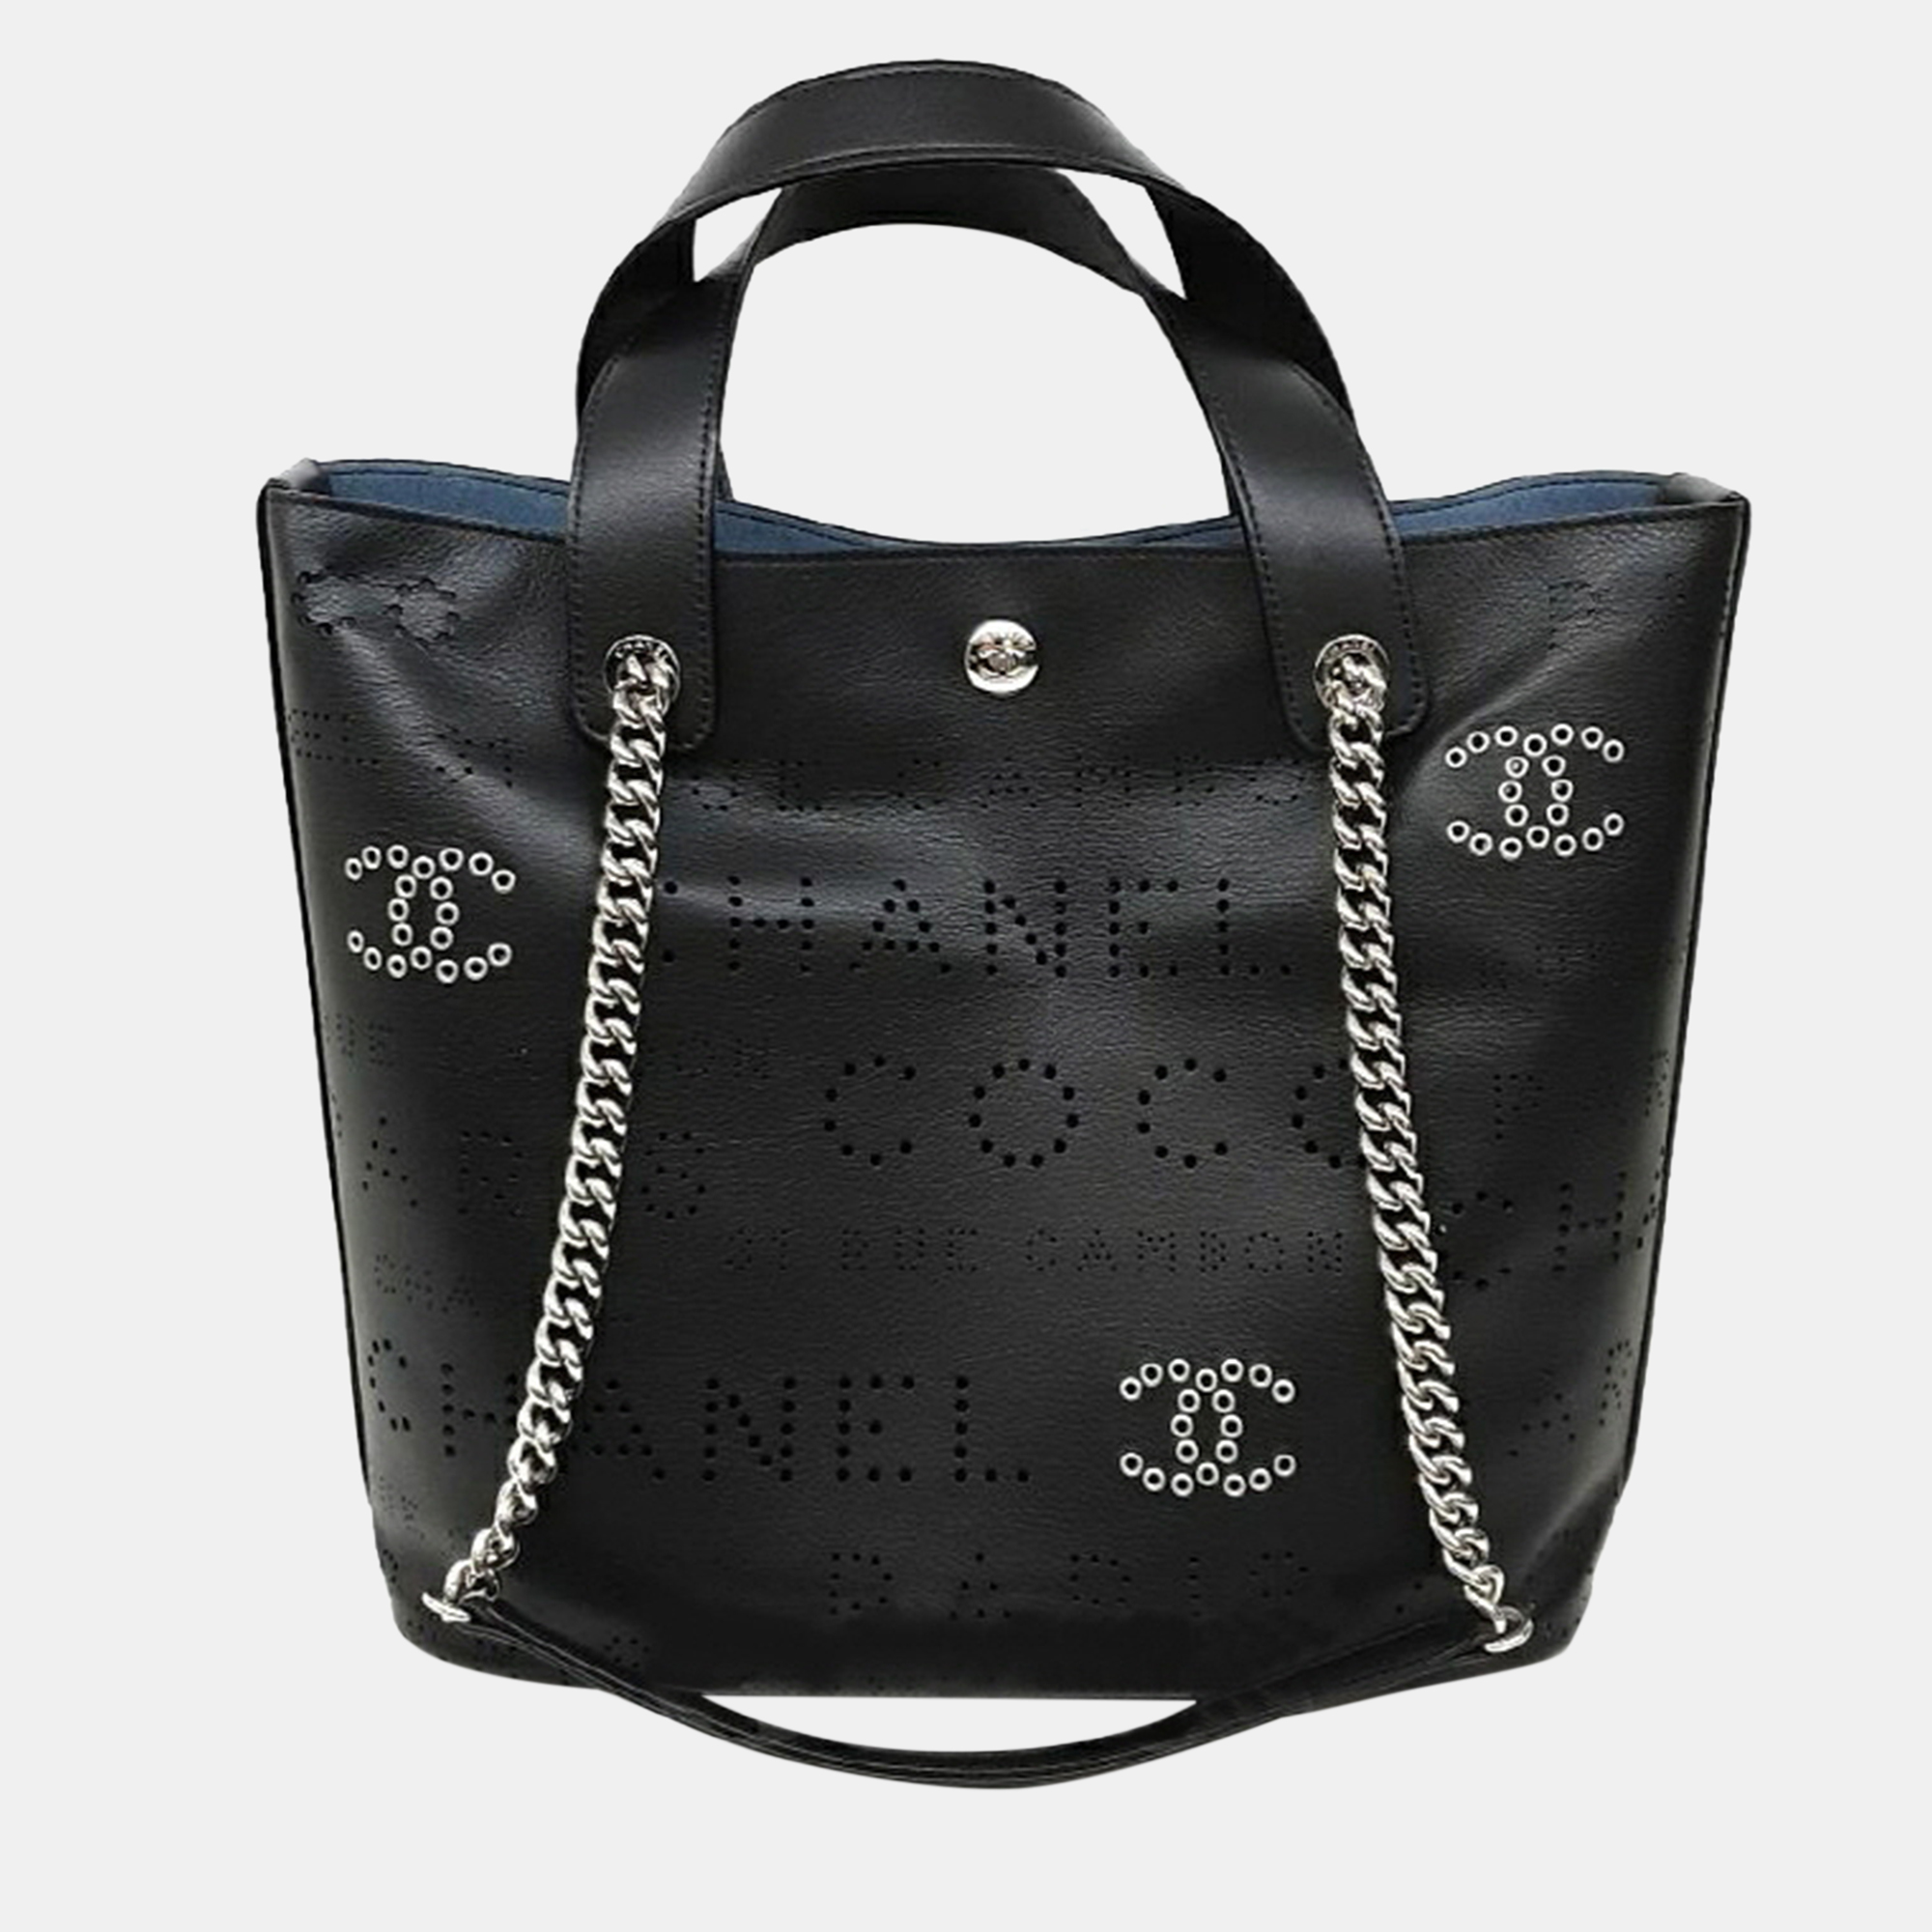 Chanel Logo Punching Tote With Shoulder Strap